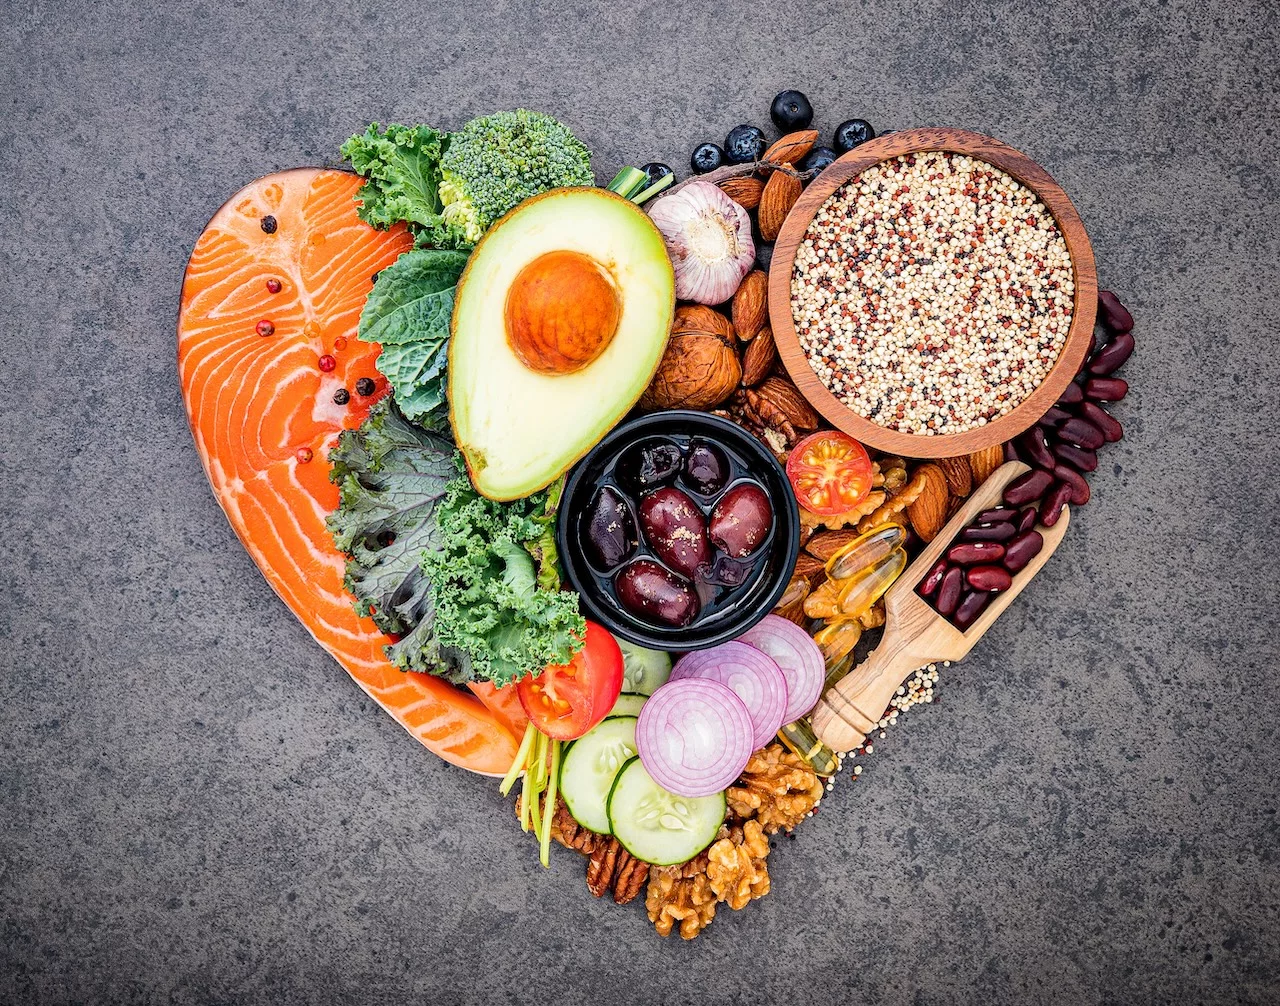 A heart-shaped arrangement of foods that help lower cholesterol with diet, including salmon, avocado, nuts, quinoa, and various fresh vegetables.